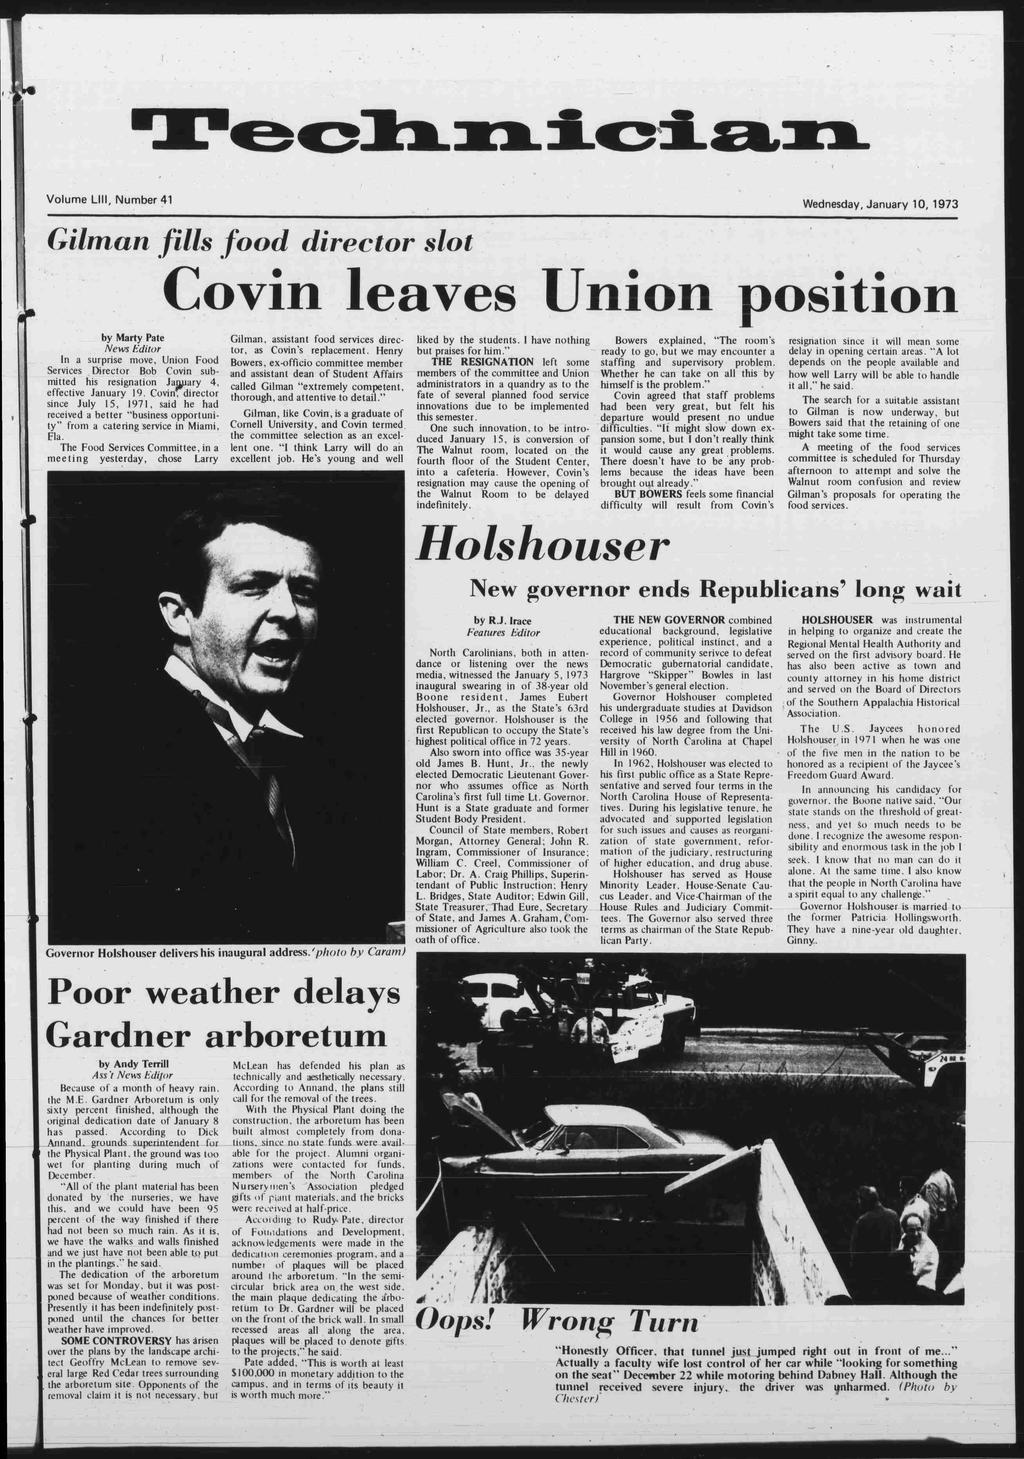 Techncan Volume Llll, Number 41 Wednesday, January 10, 1973 I d -' Glman food drector slot Covn leaves Unon poston by Marty Pate News Edtor In a surprse move, Unon Food Servces Drector Bob Covn